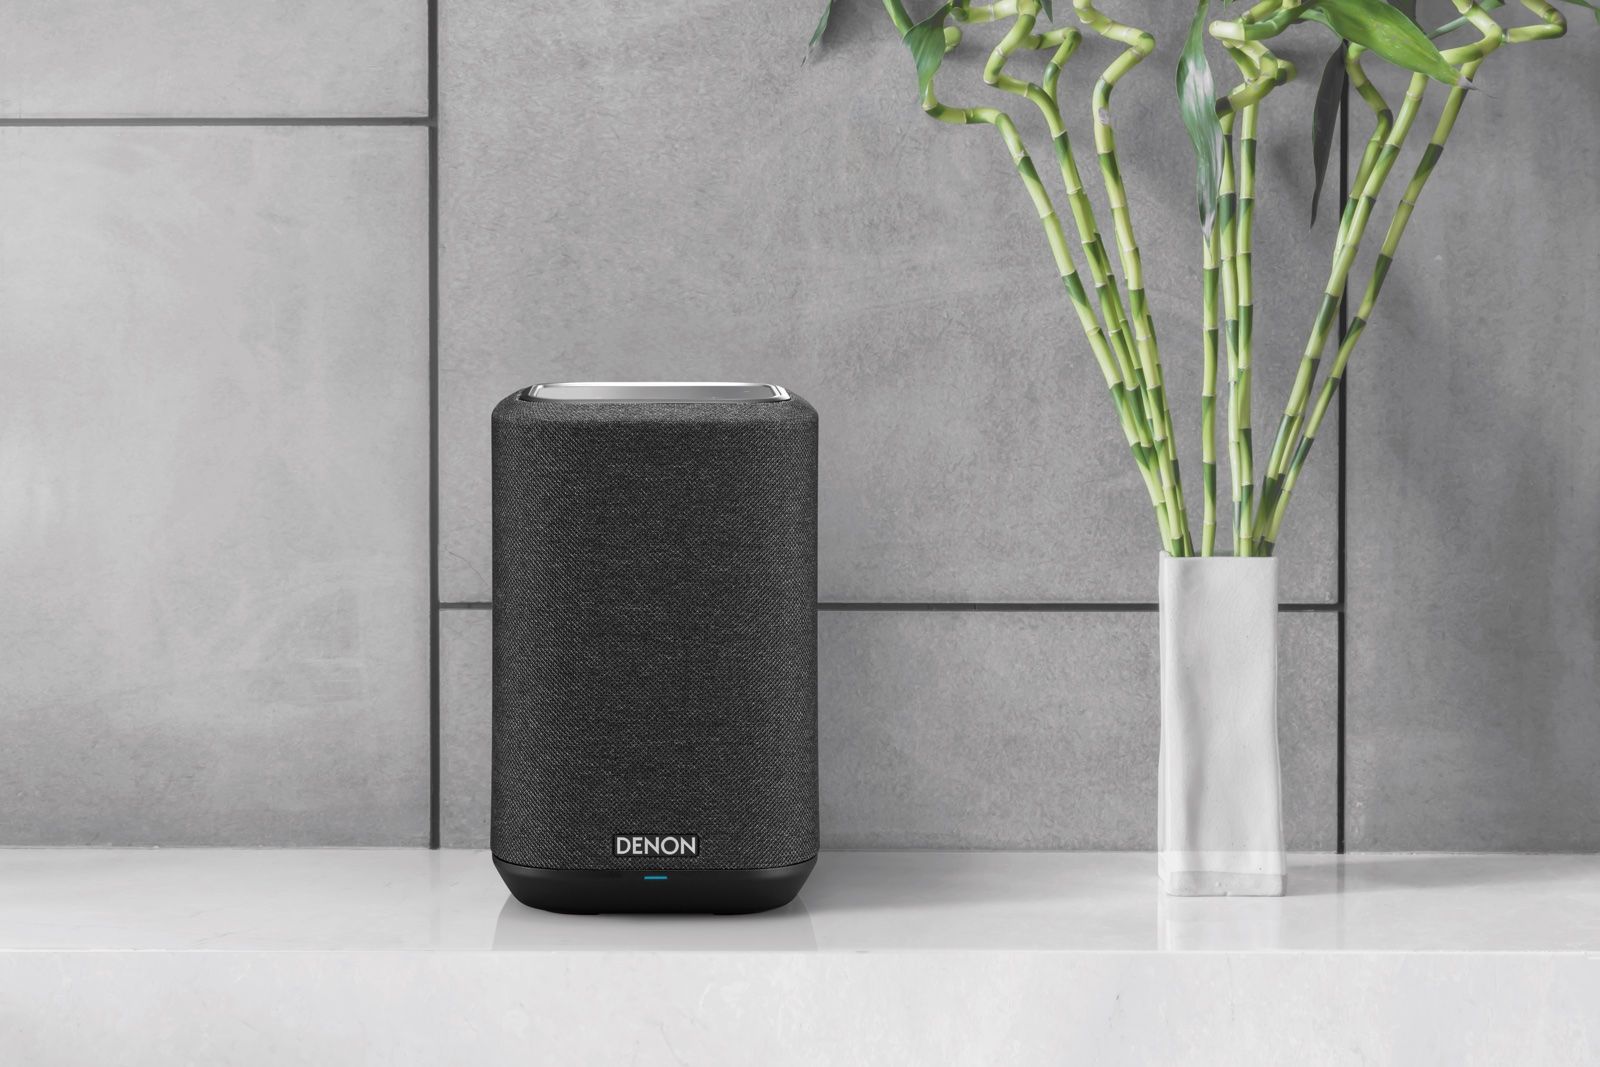 Denon Home is a range of multi-room speakers to challenge Sonos image 1